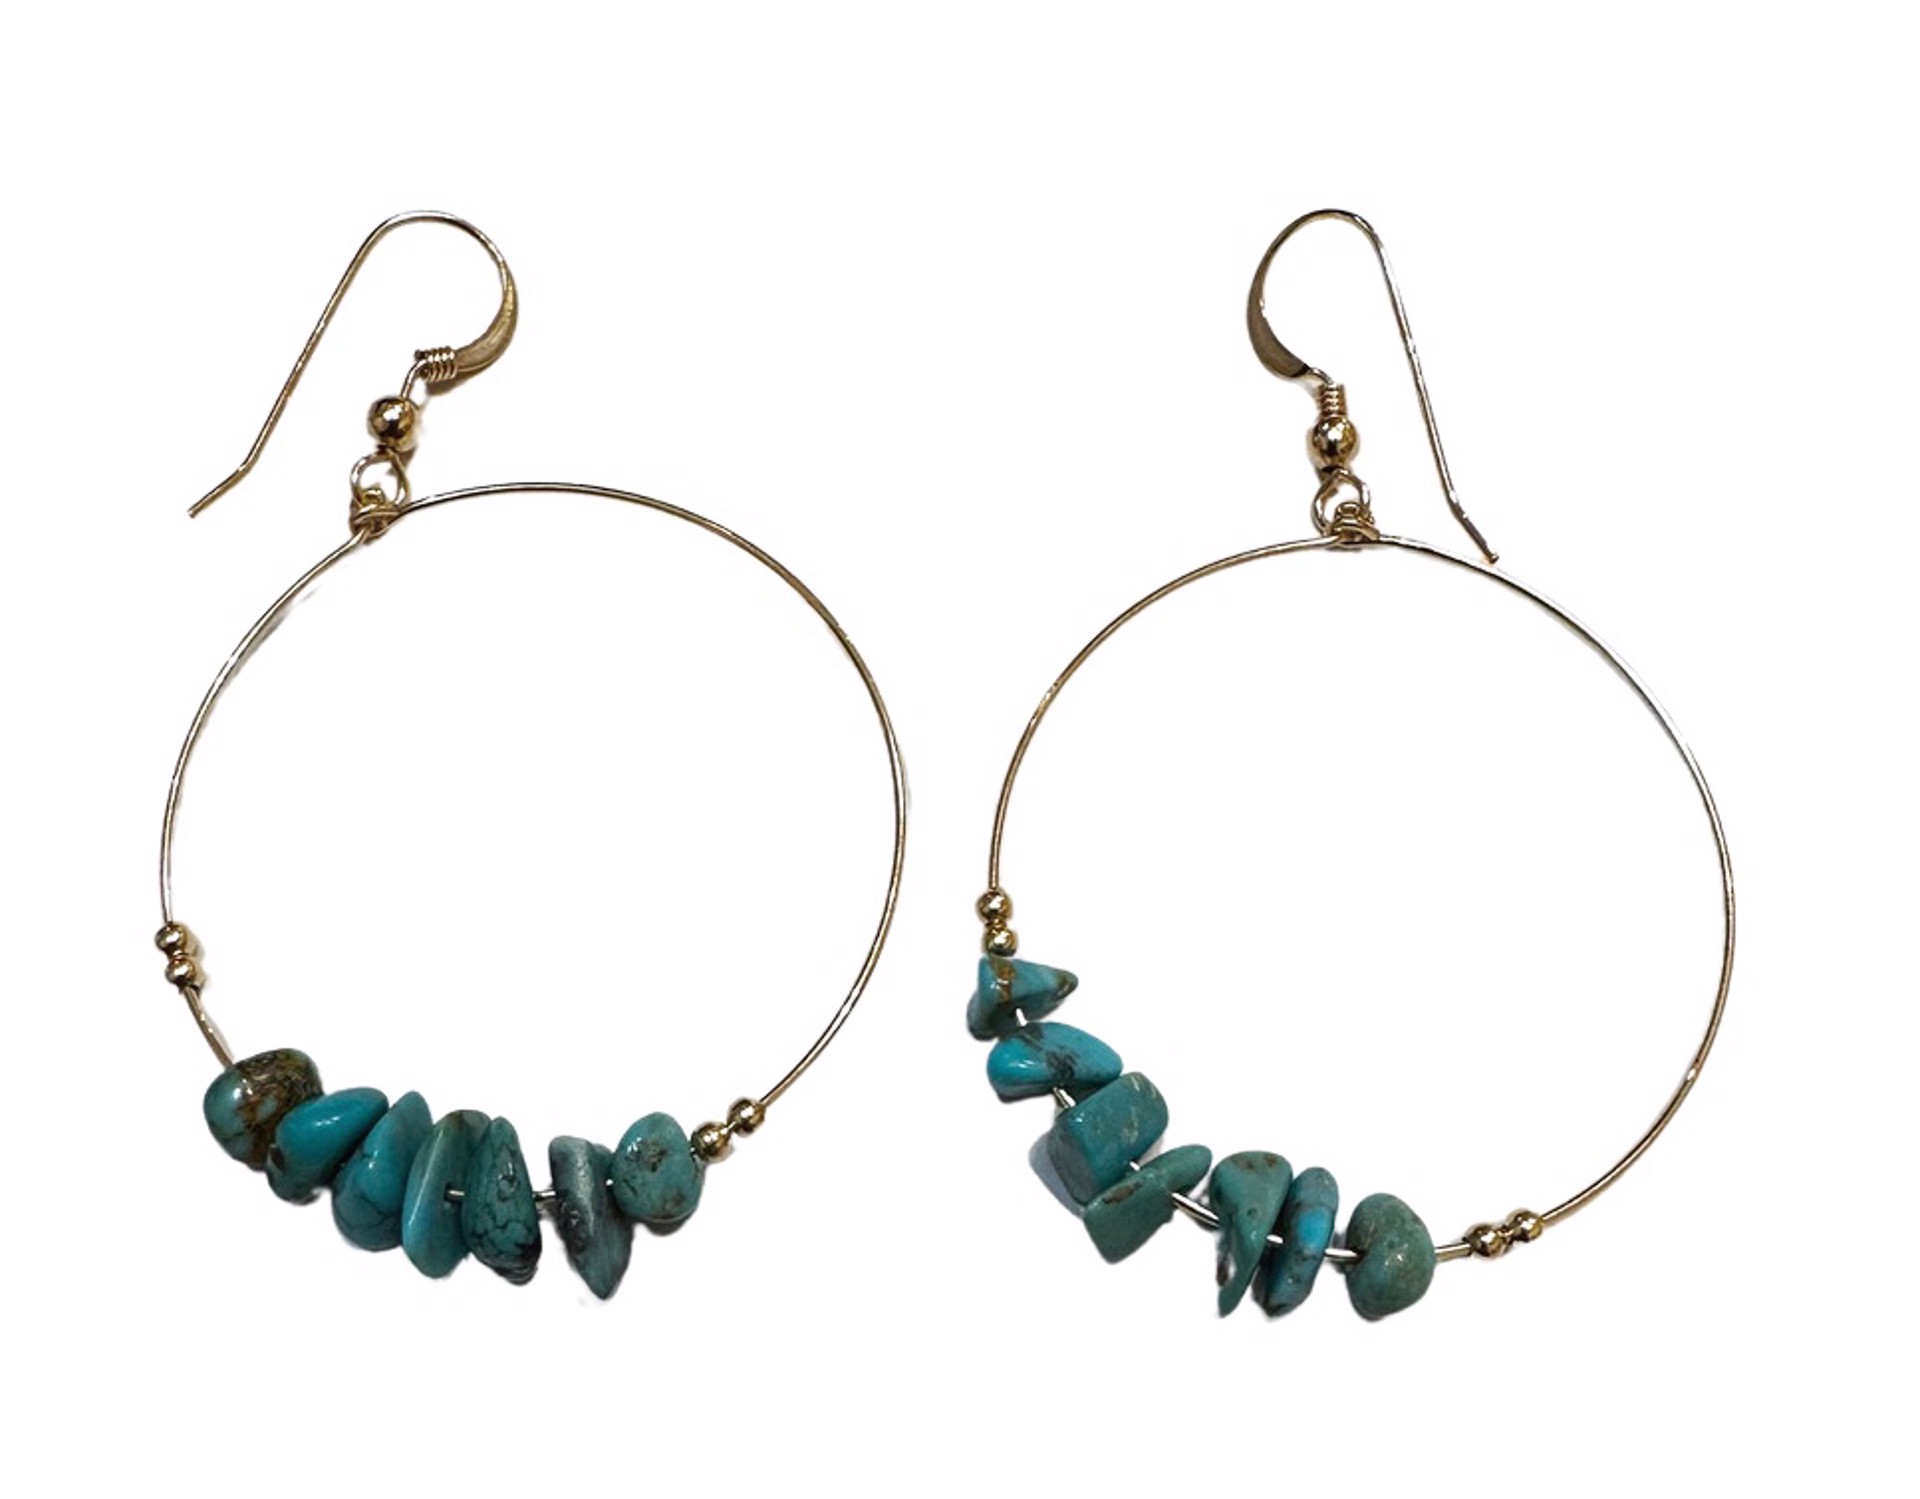 Earrings - Turquoise Hoops with 14K Gold by Julia Balestracci